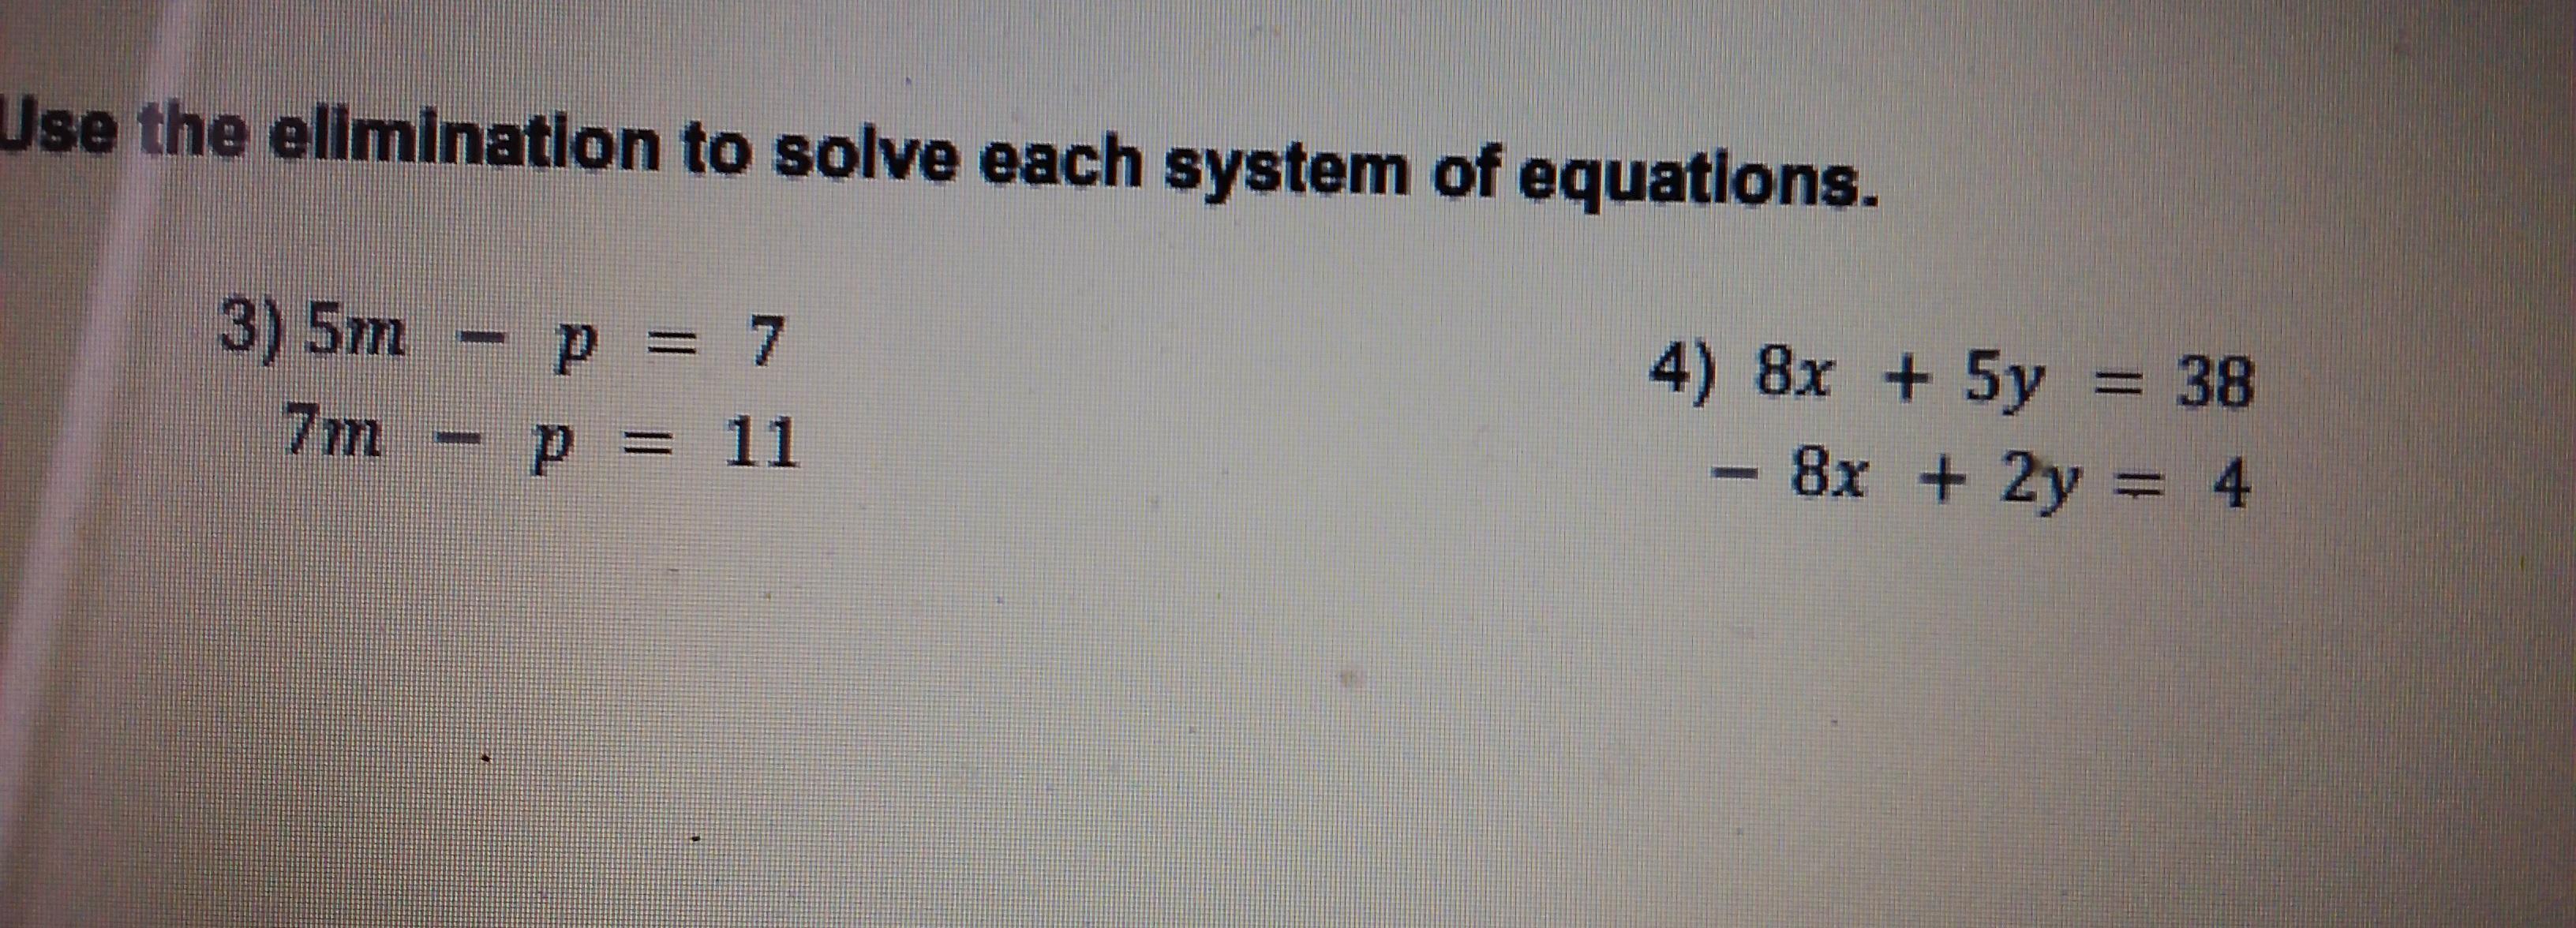 Use The Elimination To Solve Each System Of Equations Exercise Number 4)